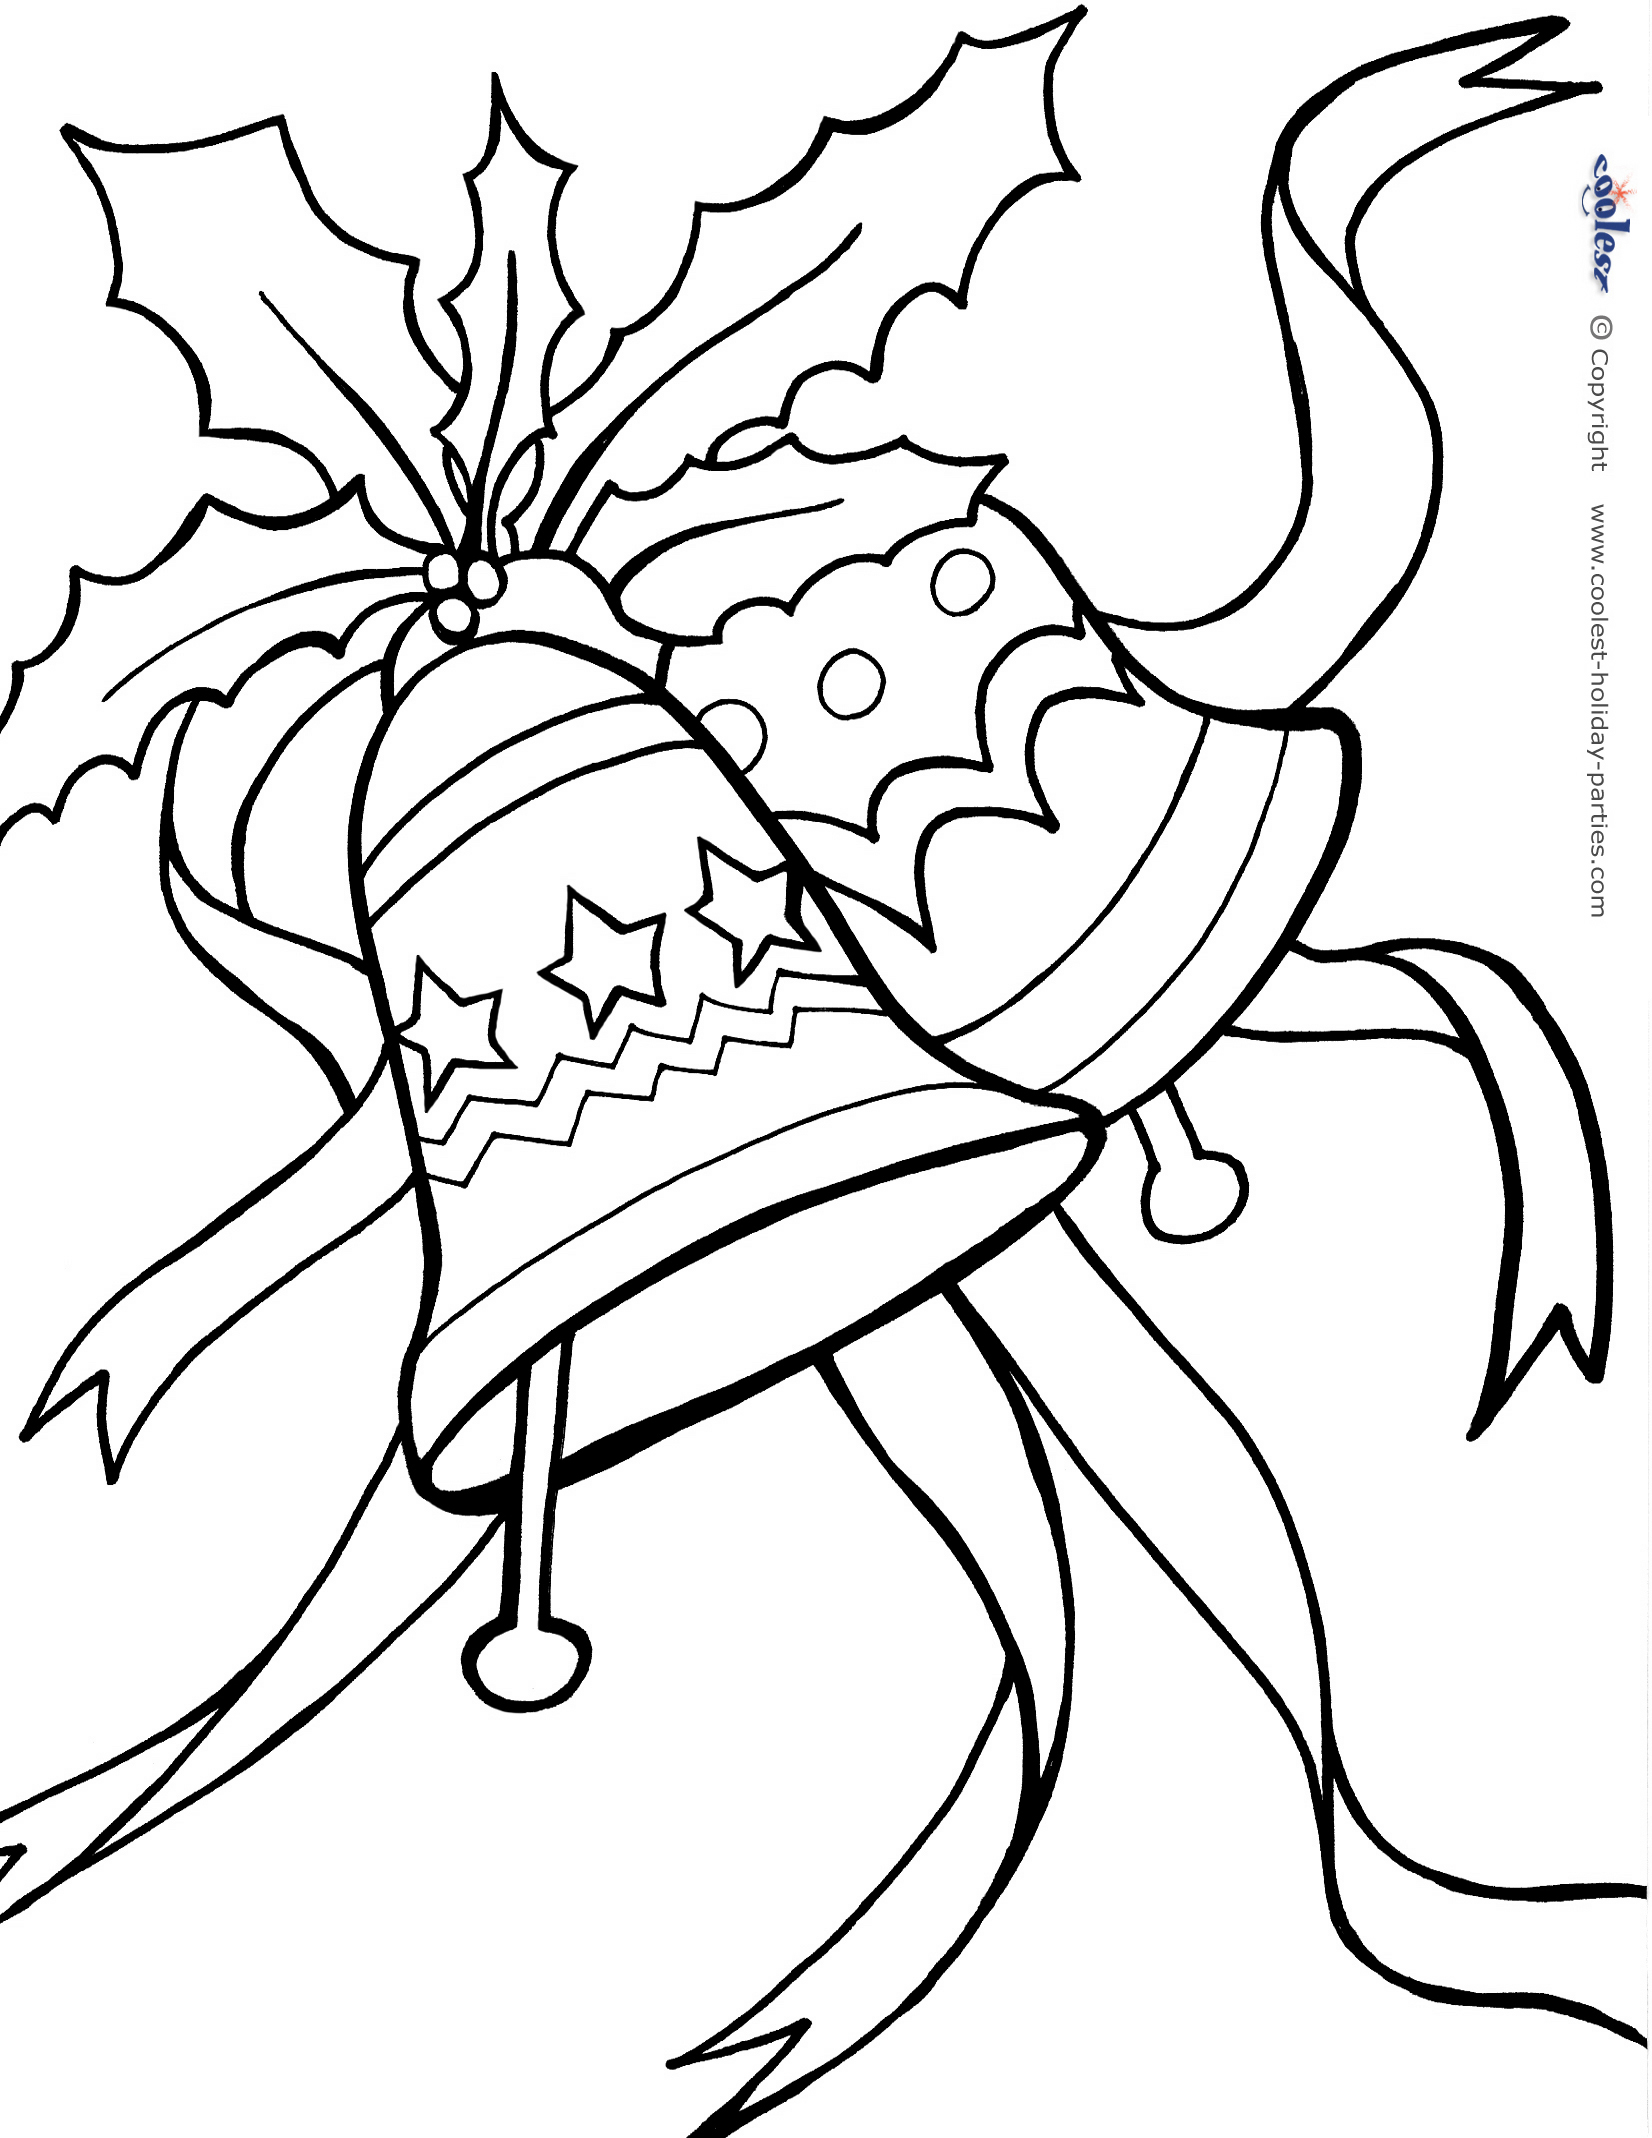 Printable Christmas Coloring Page 19 - Coolest Free Printables